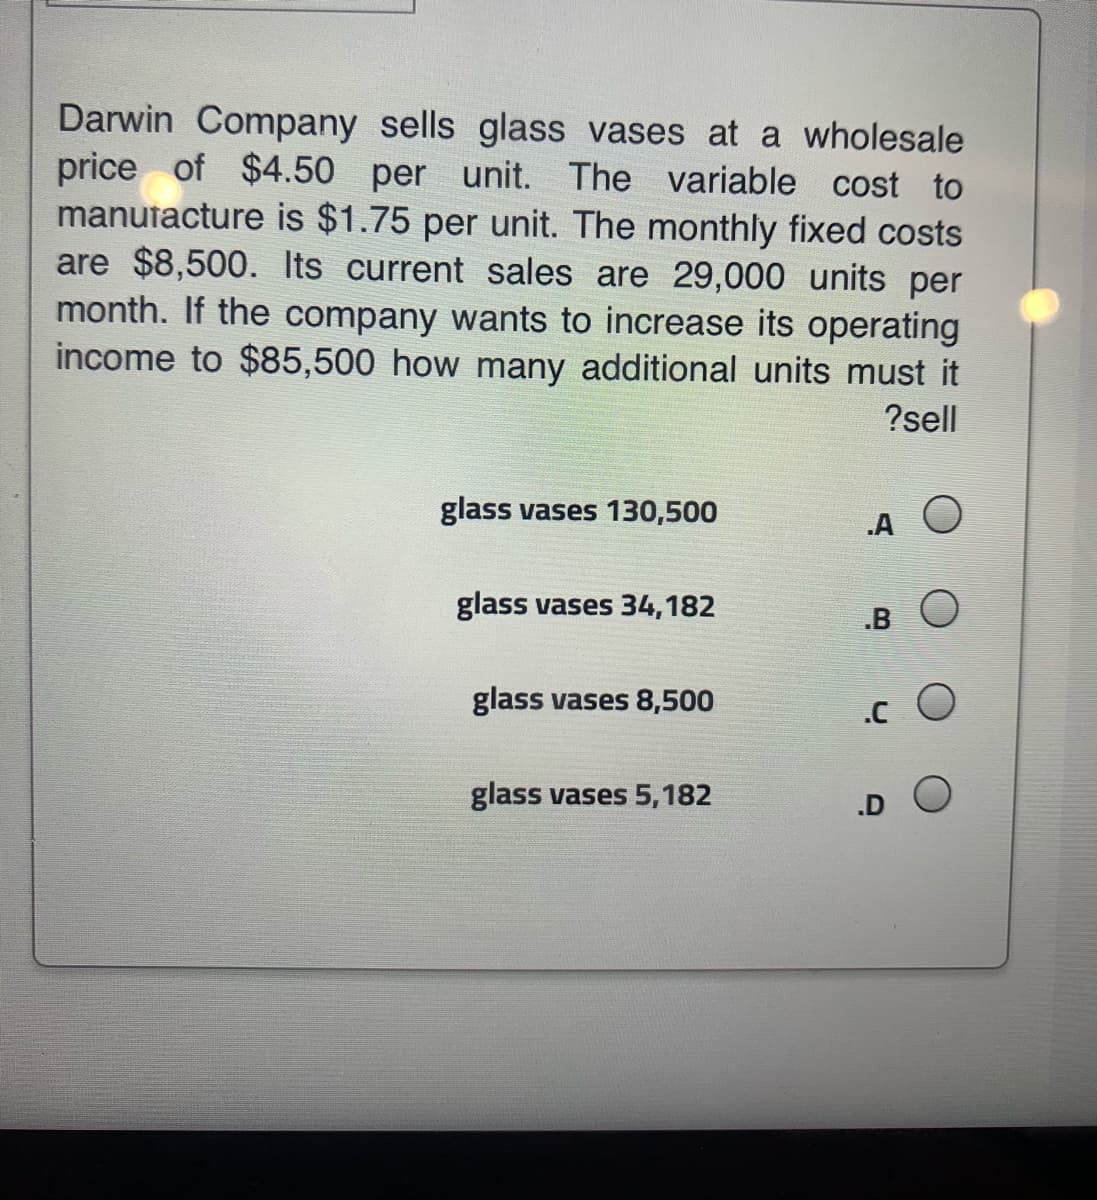 Darwin Company sells glass vases at a wholesale
price of $4.50 per unit. The variable cost to
manutacture is $1.75 per unit. The monthly fixed costs
are $8,500. Its current sales are 29,000 units per
month. If the company wants to increase its operating
income to $85,500 how many additional units must it
?sell
glass vases 130,500
A O
glass vases 34,182
BO
glass vases 8,500
.c O
glass vases 5,182
.D O
